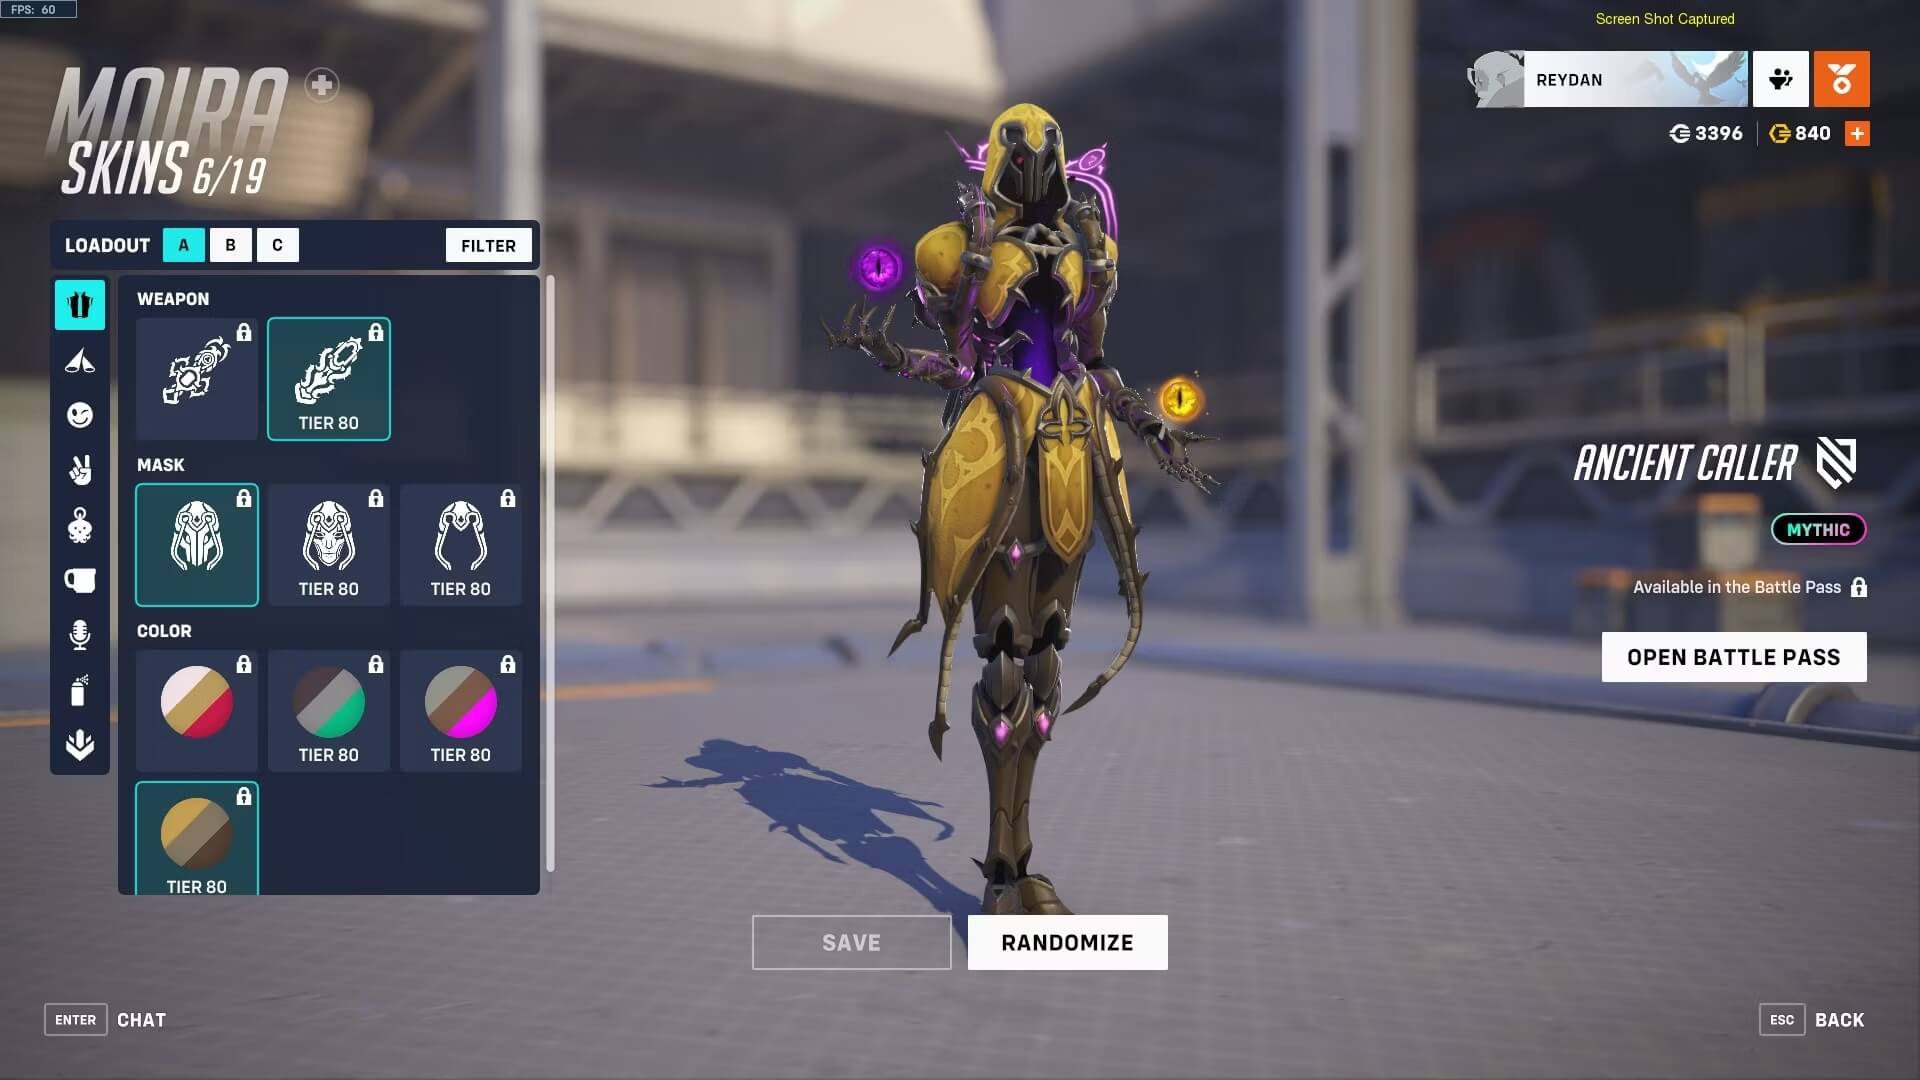 Overwatch 2 Delivers on mythic skin promise with Season 9's Ancient Caller Moira